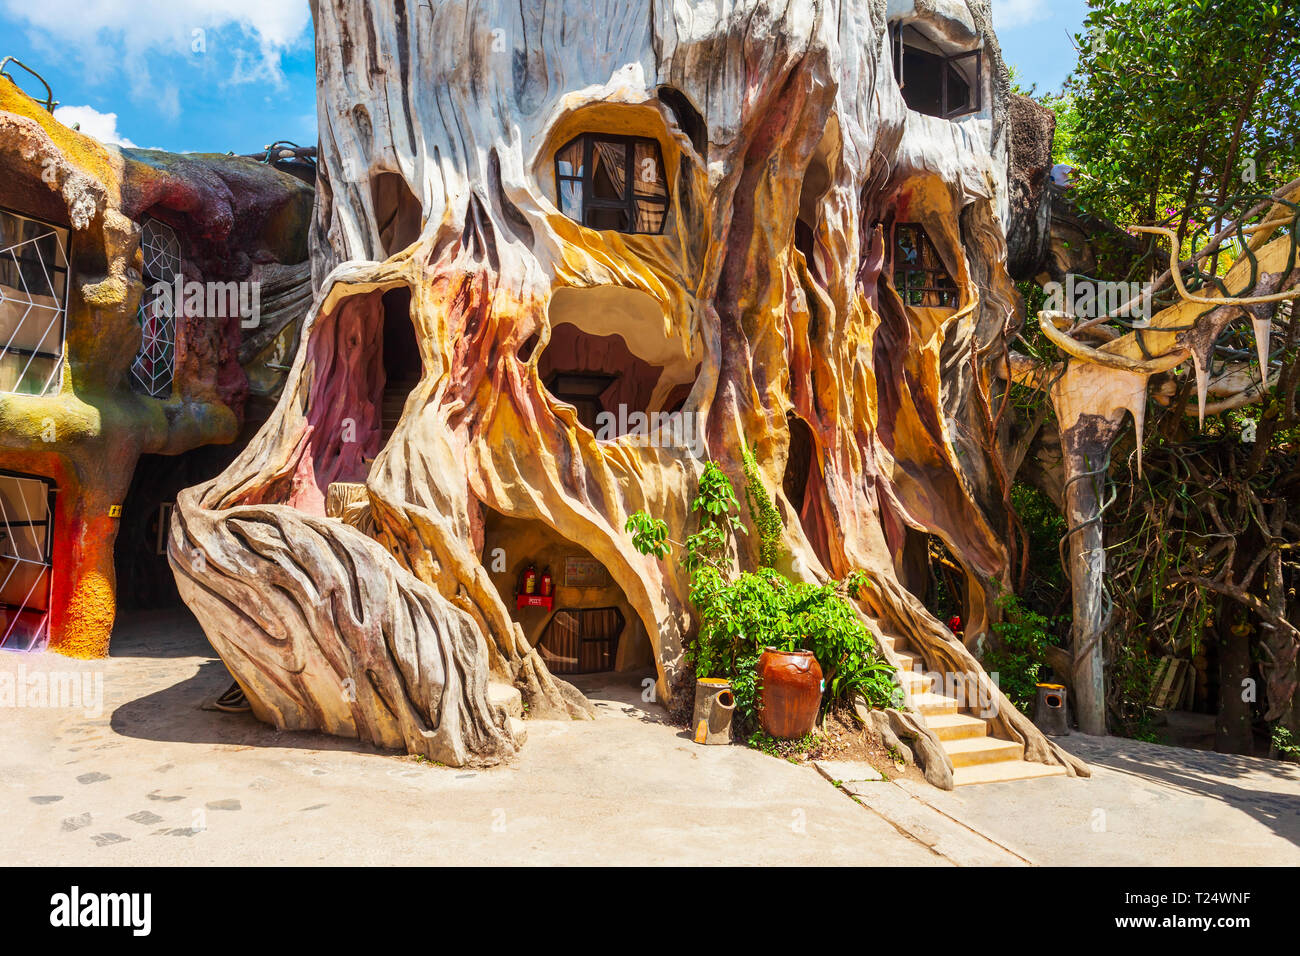 DALAT, VIETNAM - MARCH 13, 2018: Hang Nga guesthouse or Crazy House is an unconventional fairy tale building in Dalat in Vietnam Stock Photo